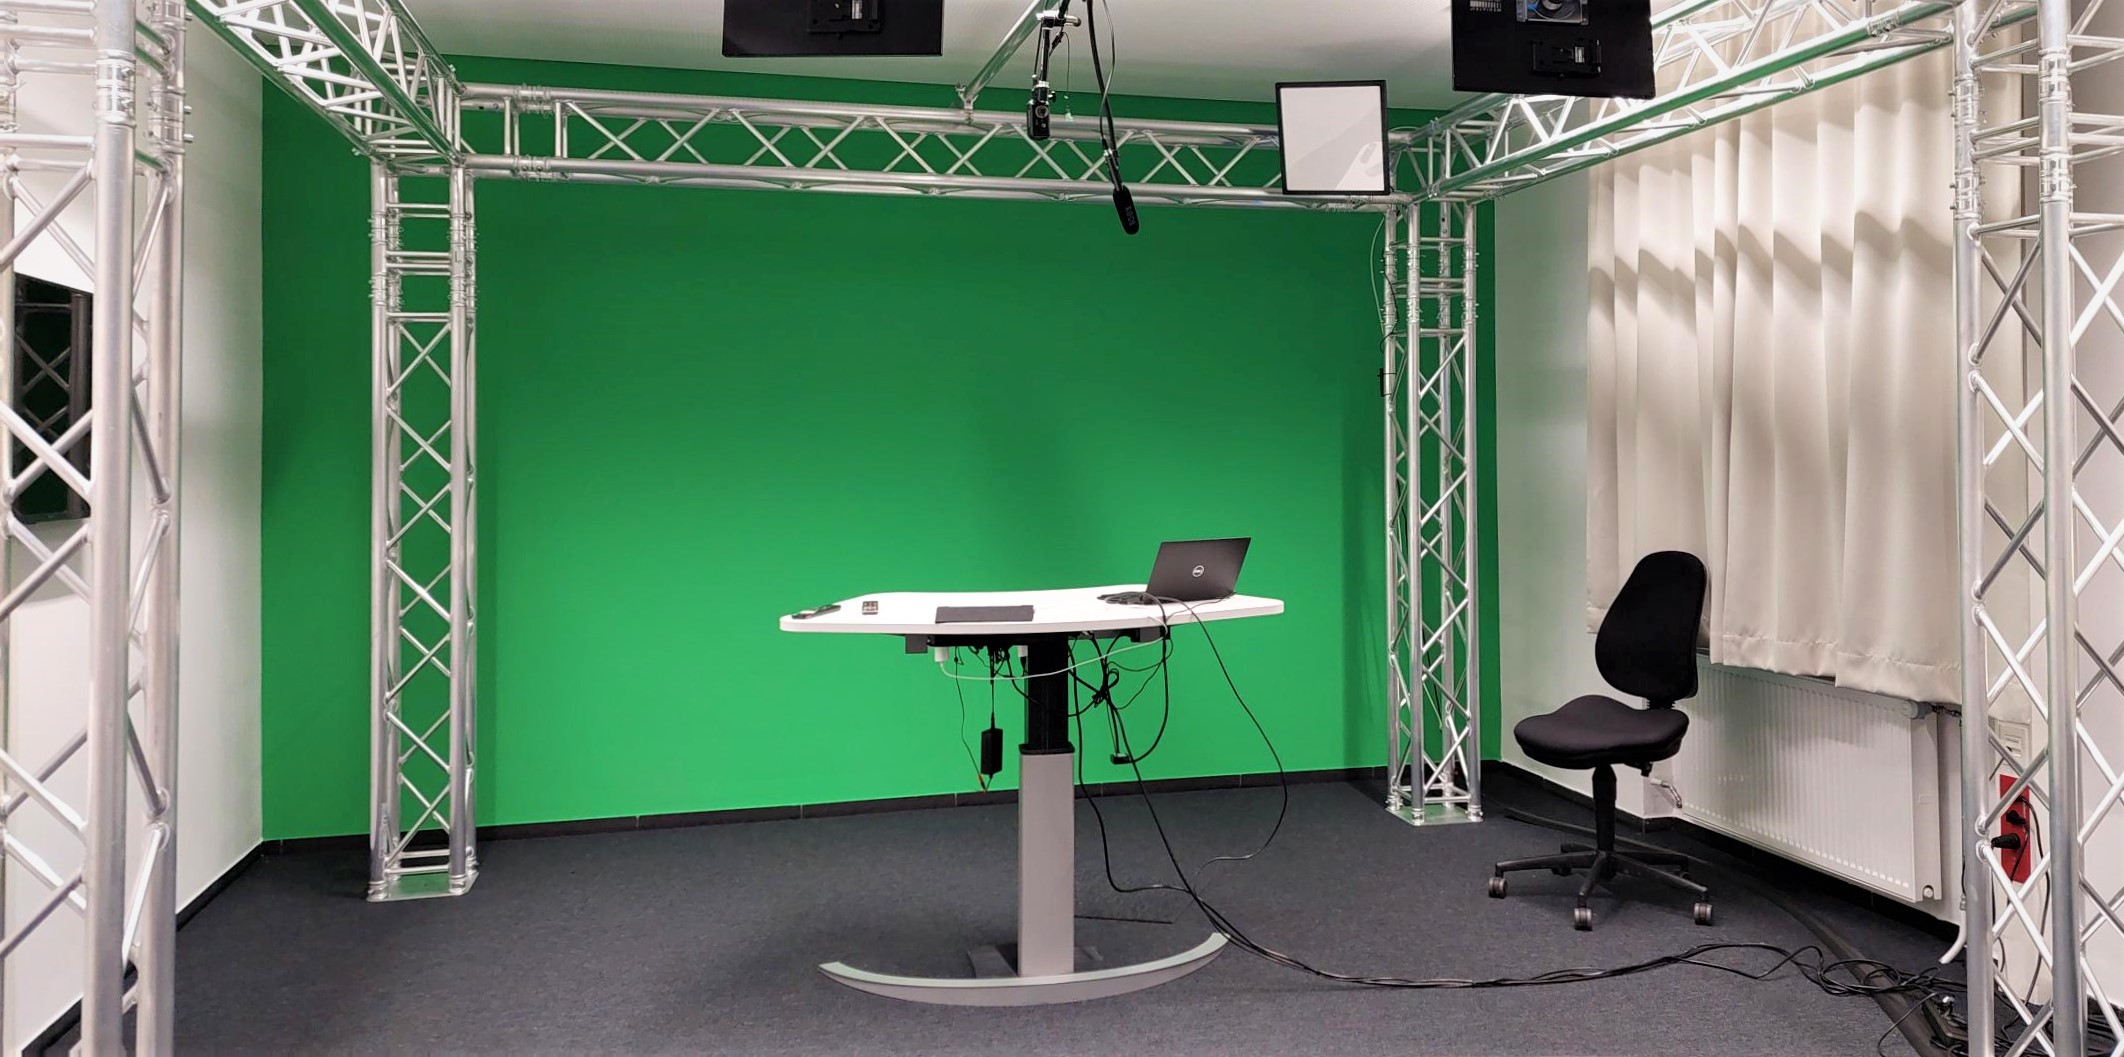 [This content is not available in "Englisch" yet] WiSo Veranstaltungsräume Filmstudio One Button Recording Studio OBRS